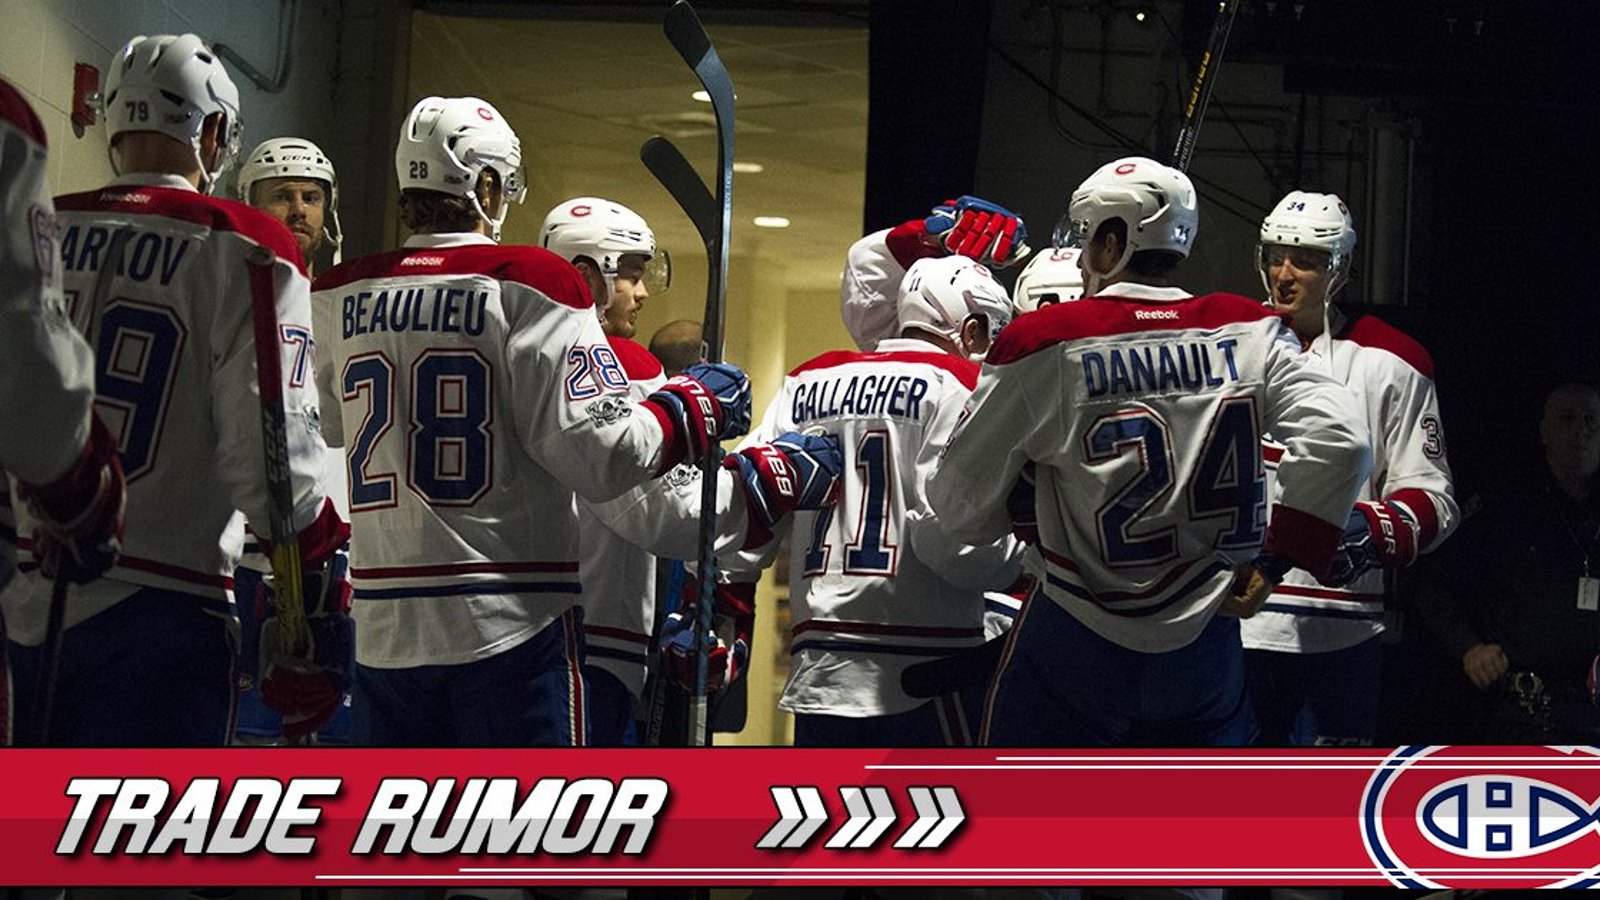 Breaking: Source confirms Habs are trying to trade one of their veterans.